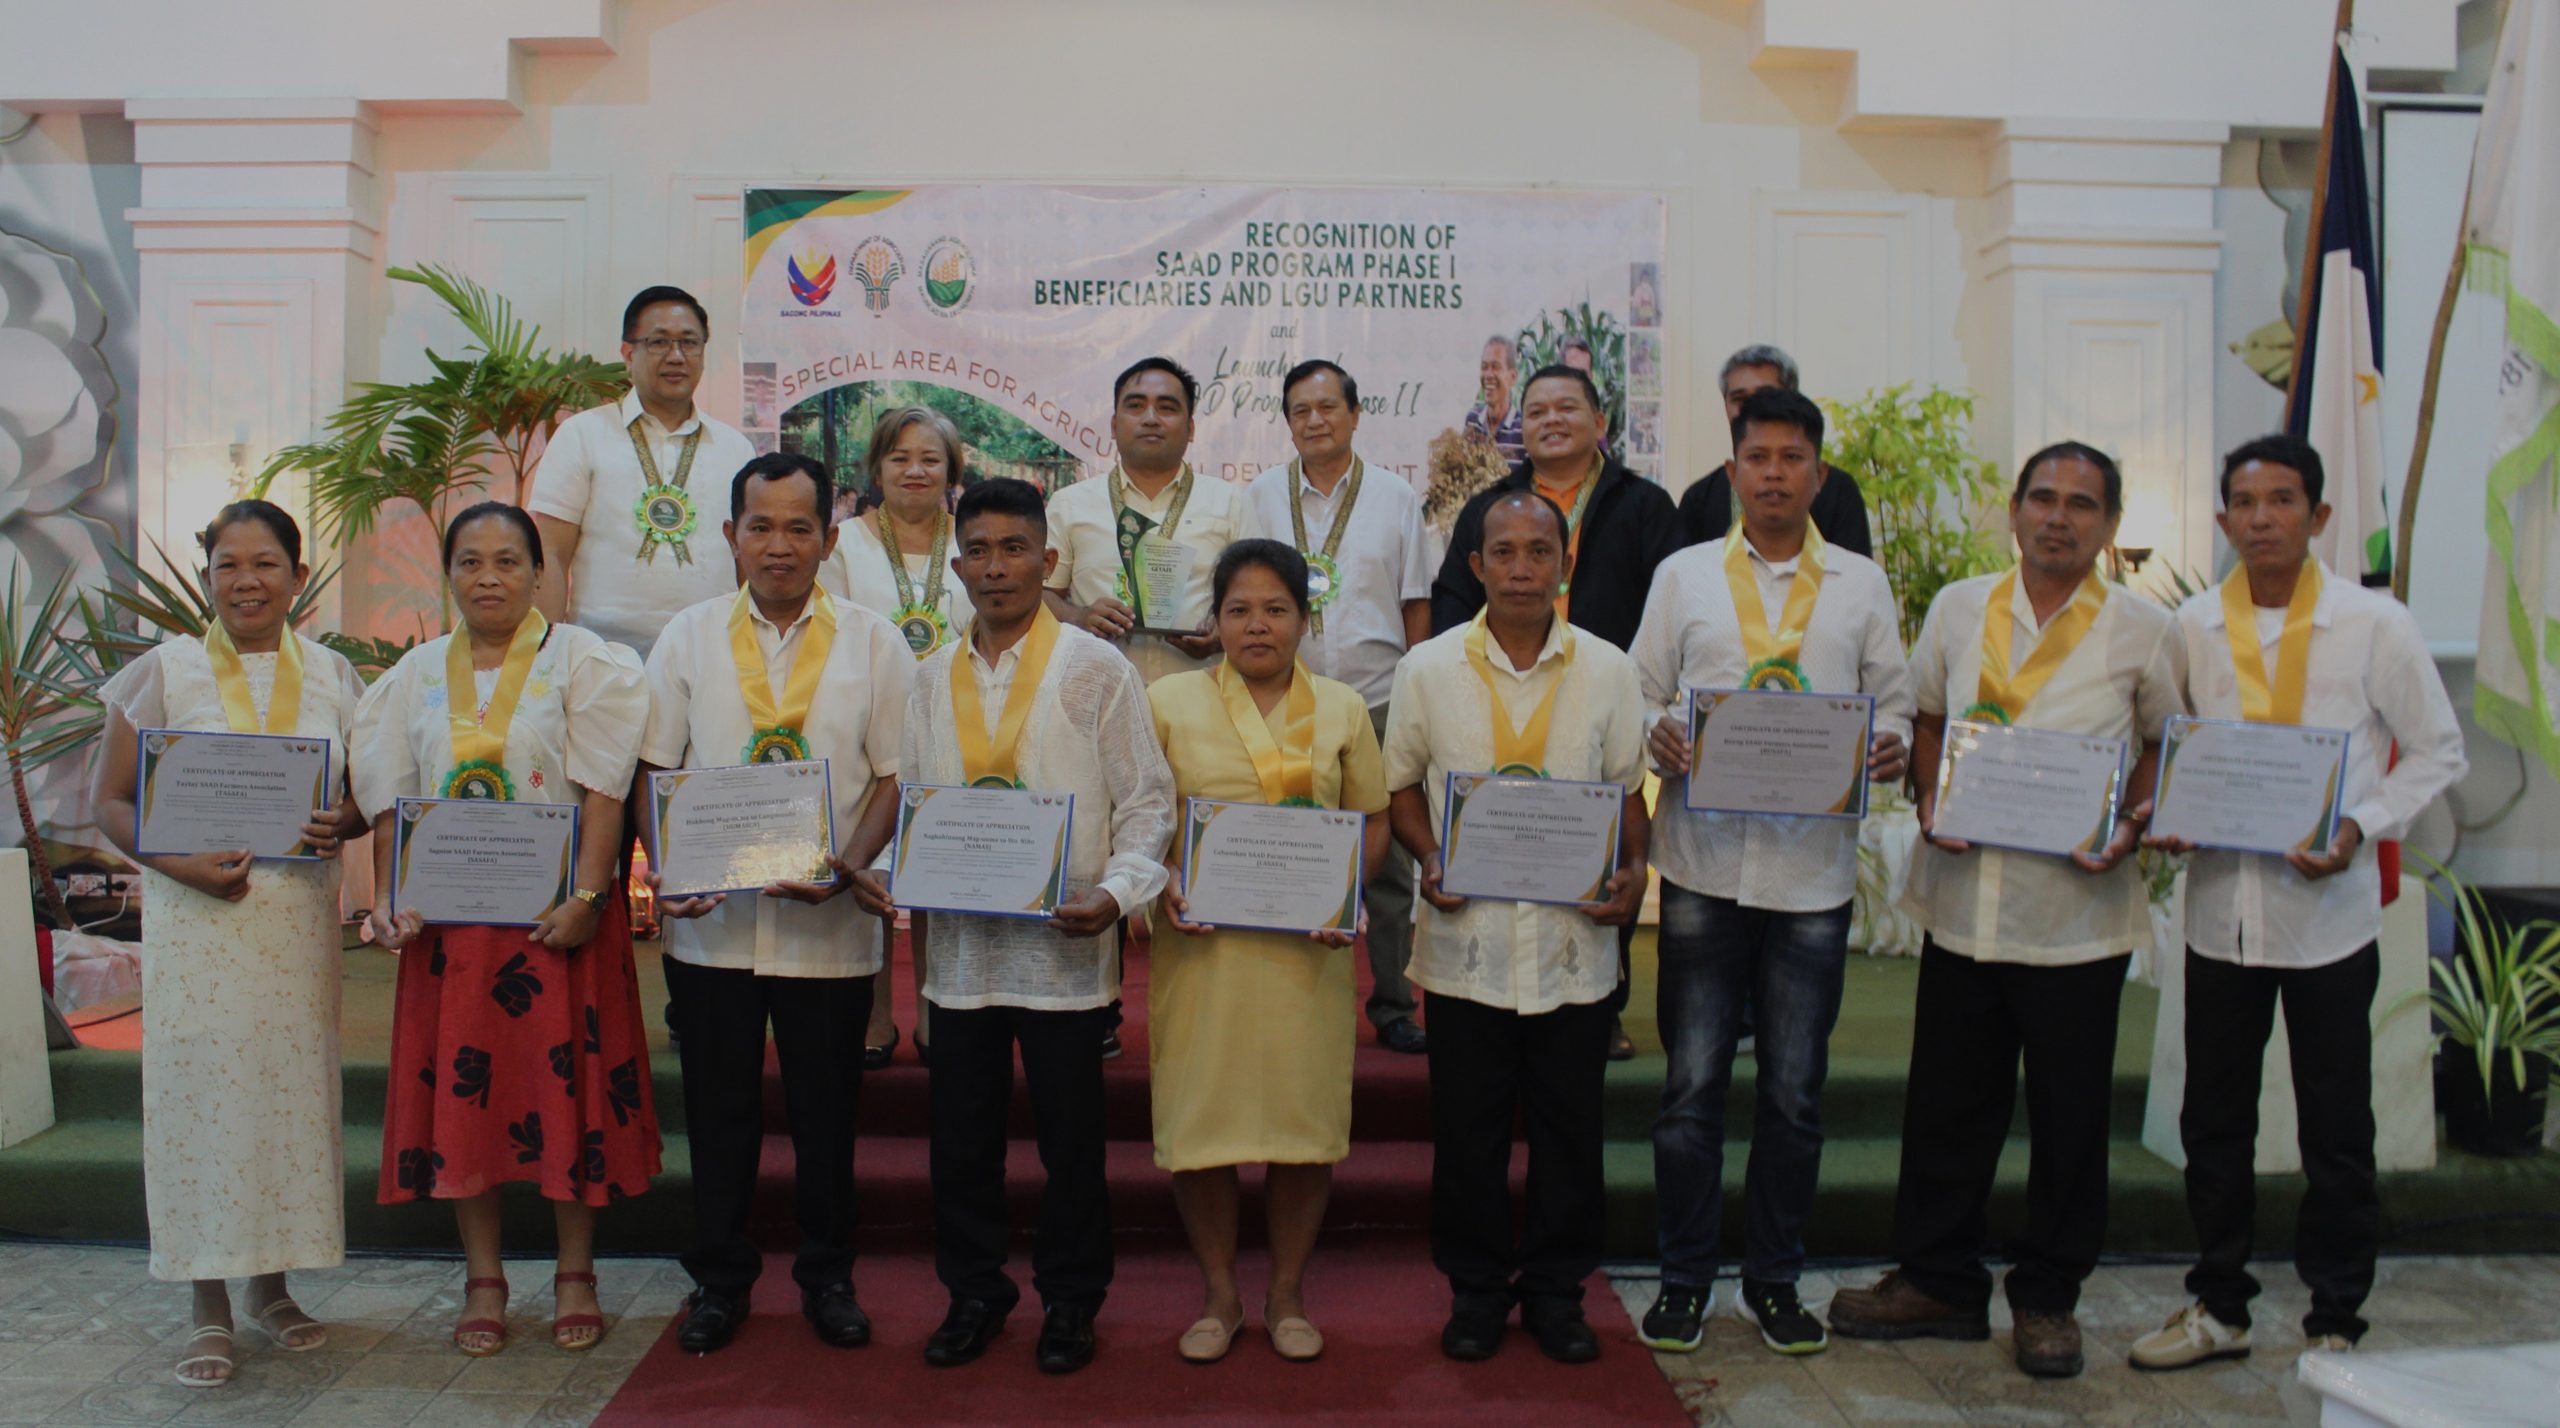 SAAD Central Visayas turns over 41 FAs to partner LGUs cum launching of Phase 2